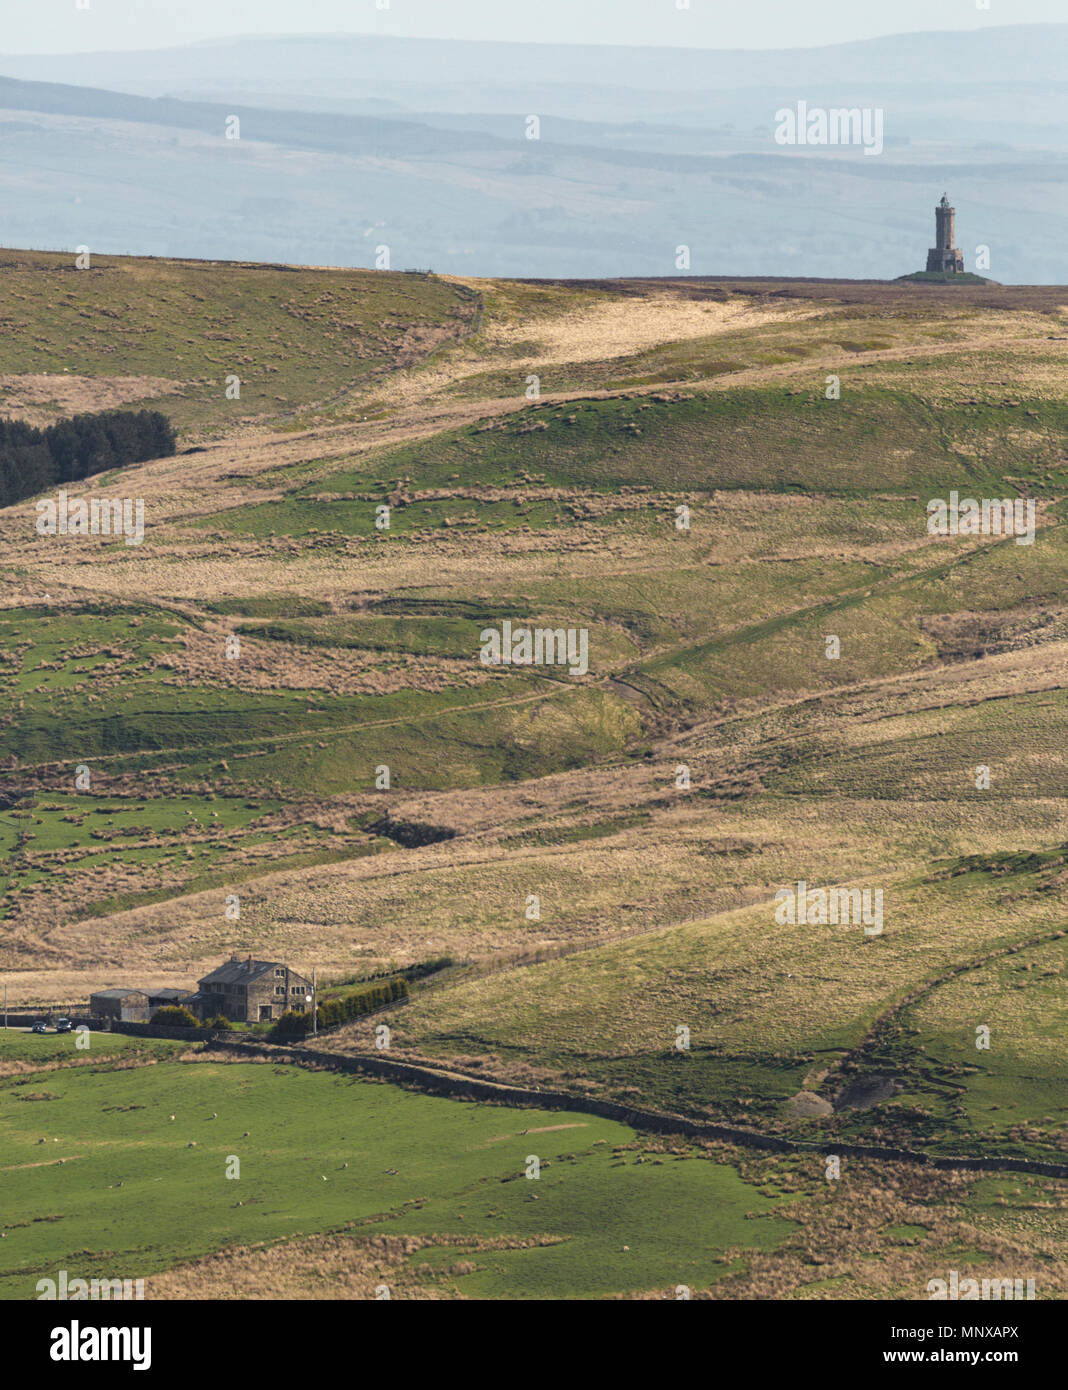 Darwen Tower (Jubilee Tower) and a view of the West Pennine Moors showing the emptiness and bleak beauty of the area. Stock Photo